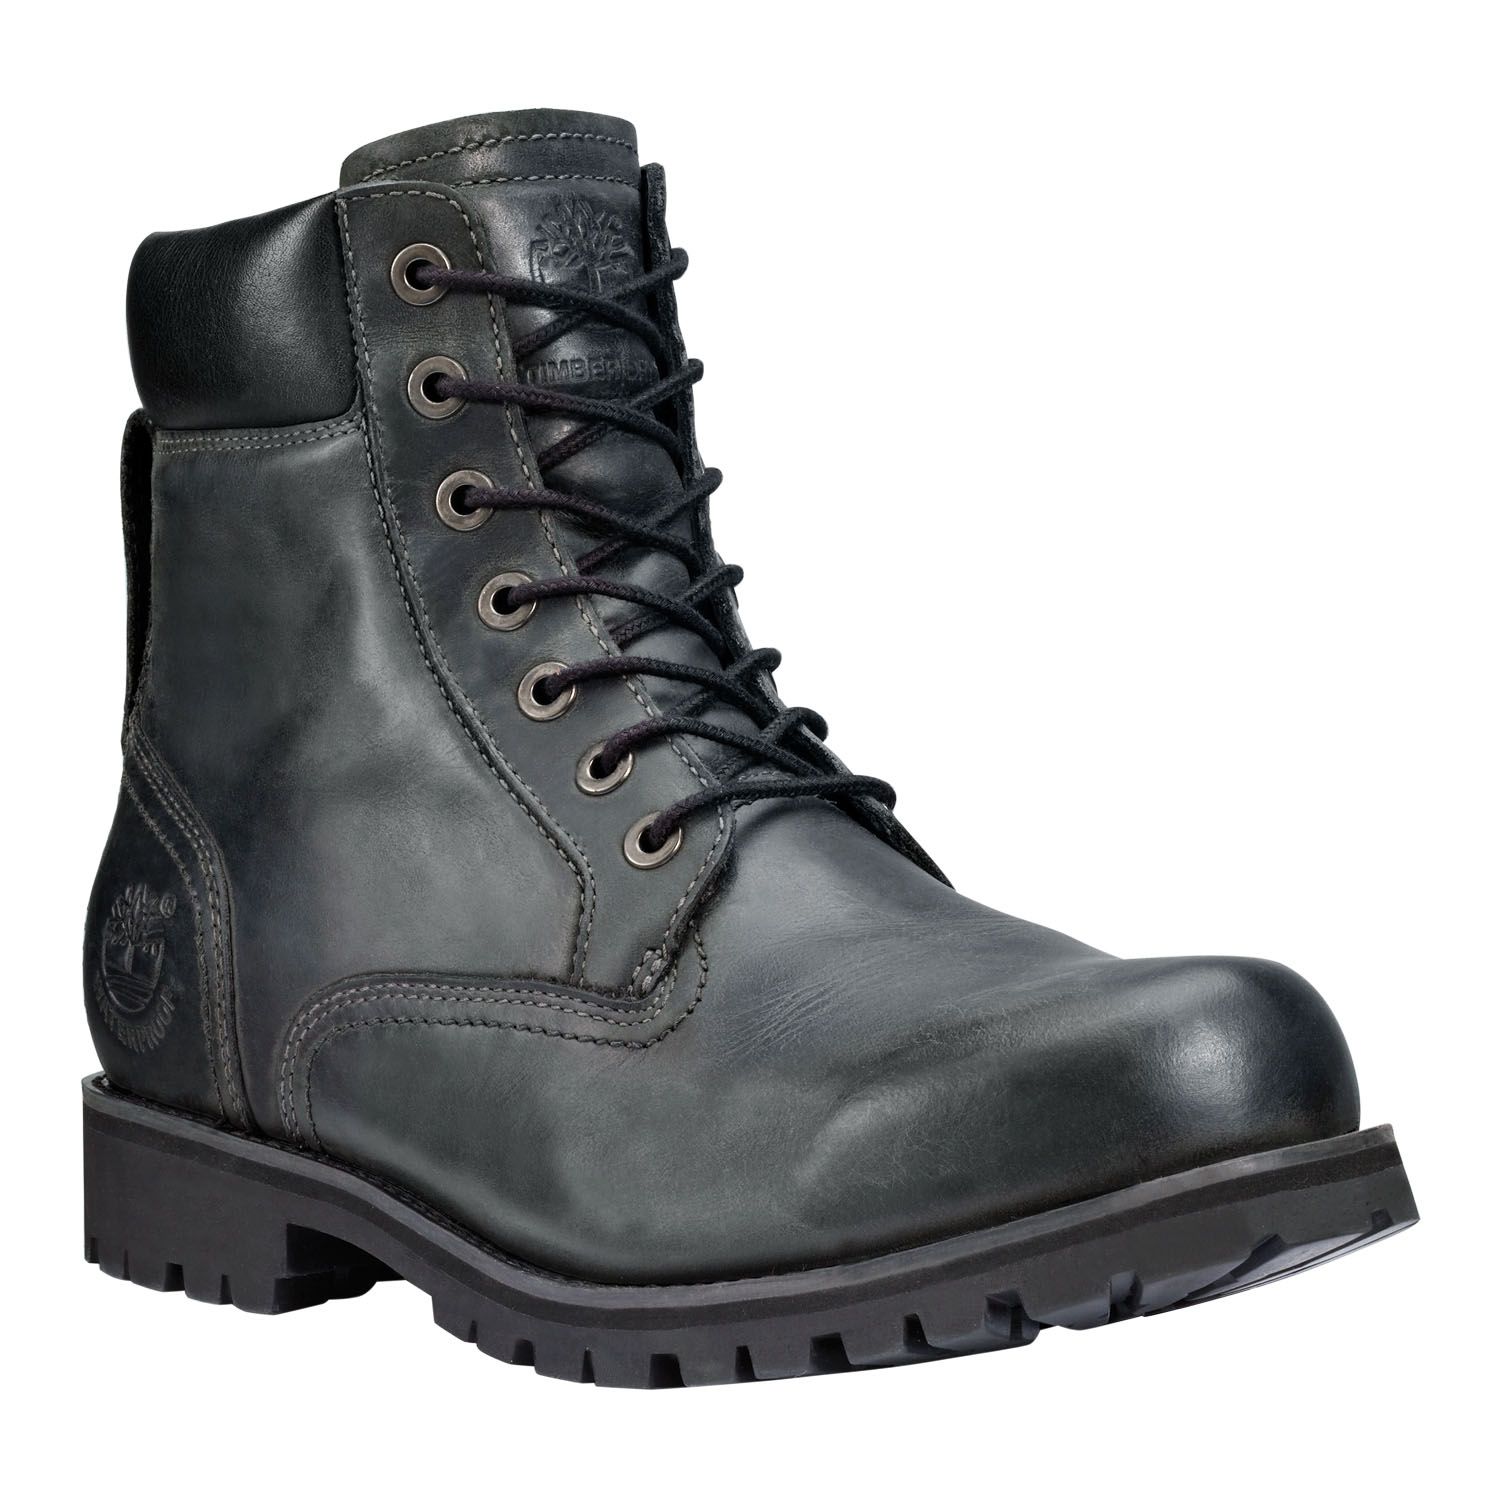 earthkeepers rugged boot